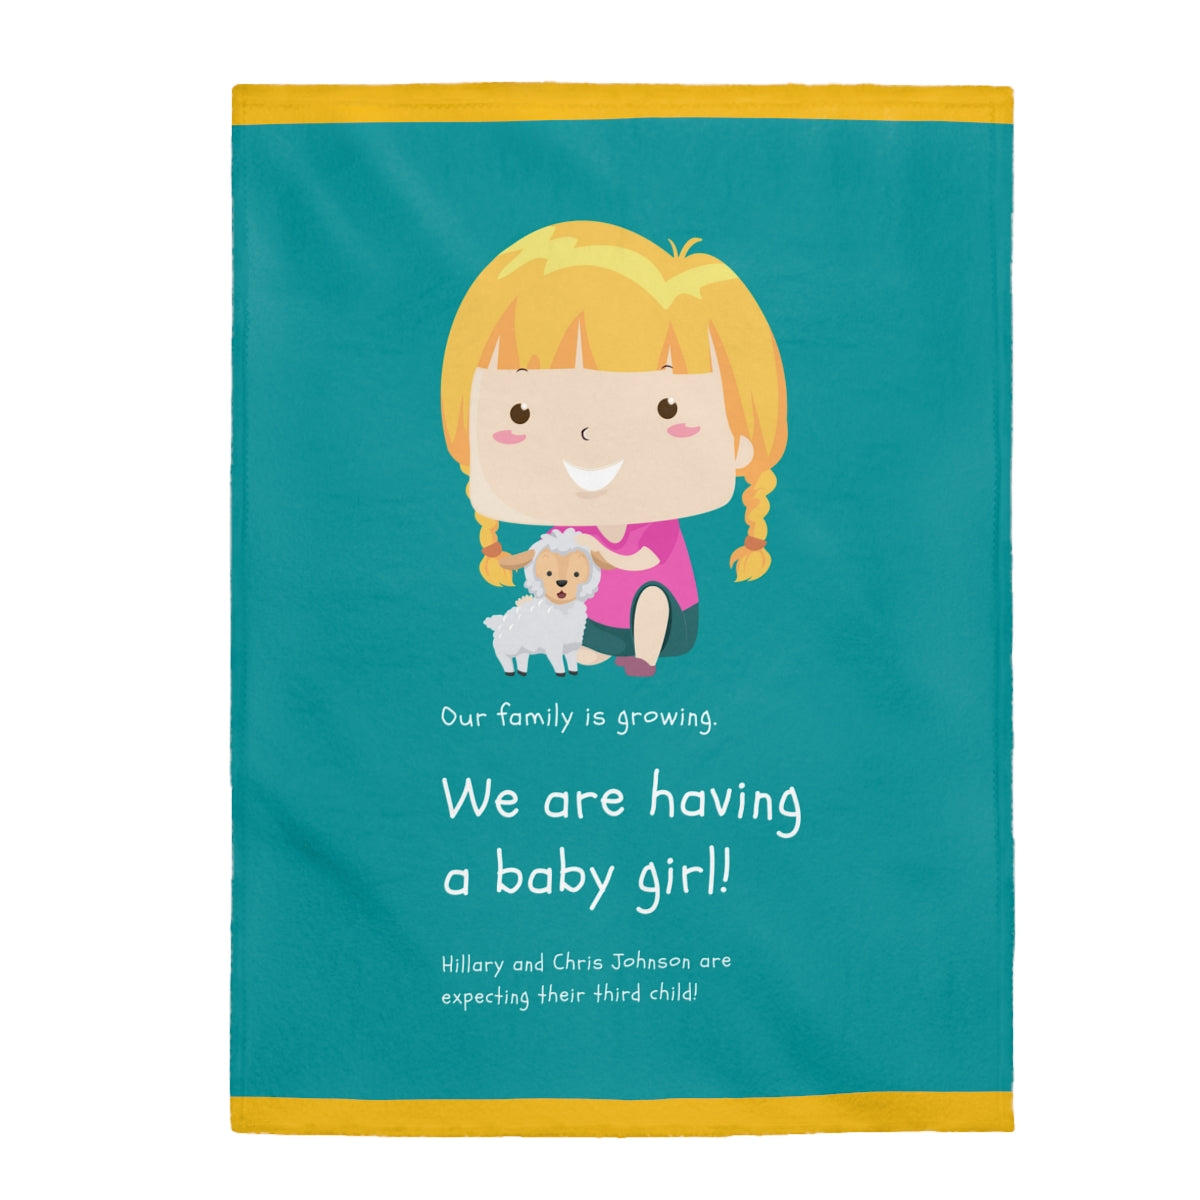 Baby and Expecting Parents Blankets Personalised,  -&-are having a Baby Theme Throw Blanket, Plush Super Soft Cozy Throw Blankets 3 Sizes, for kids and parents